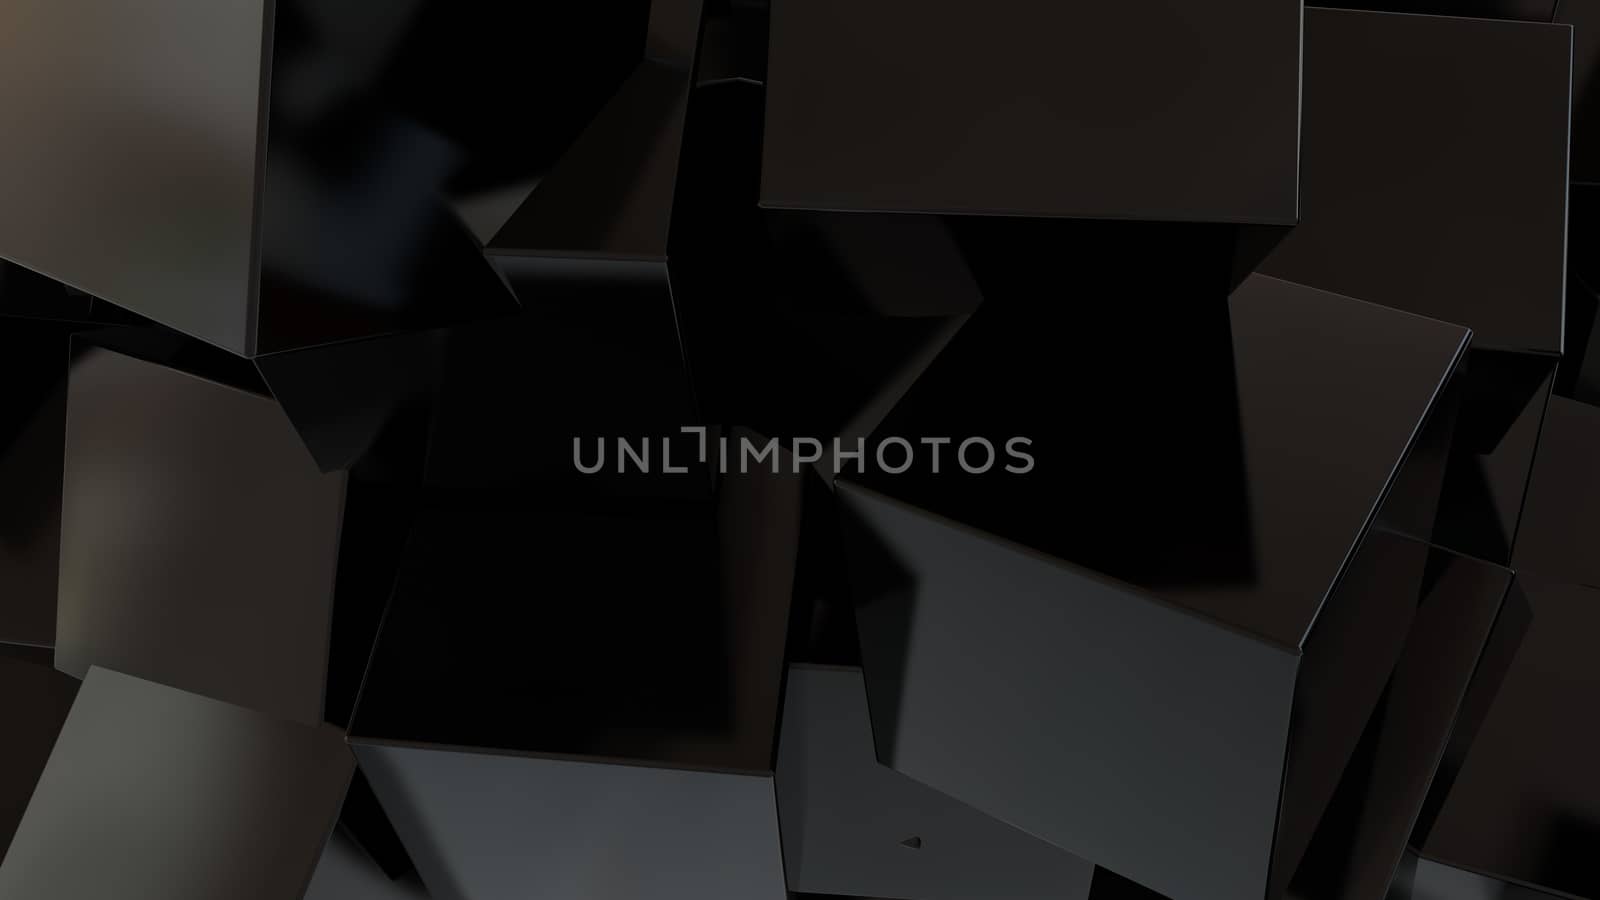 Abstract background with black cubes. Technology concept backdrop. 3d rendering digital background